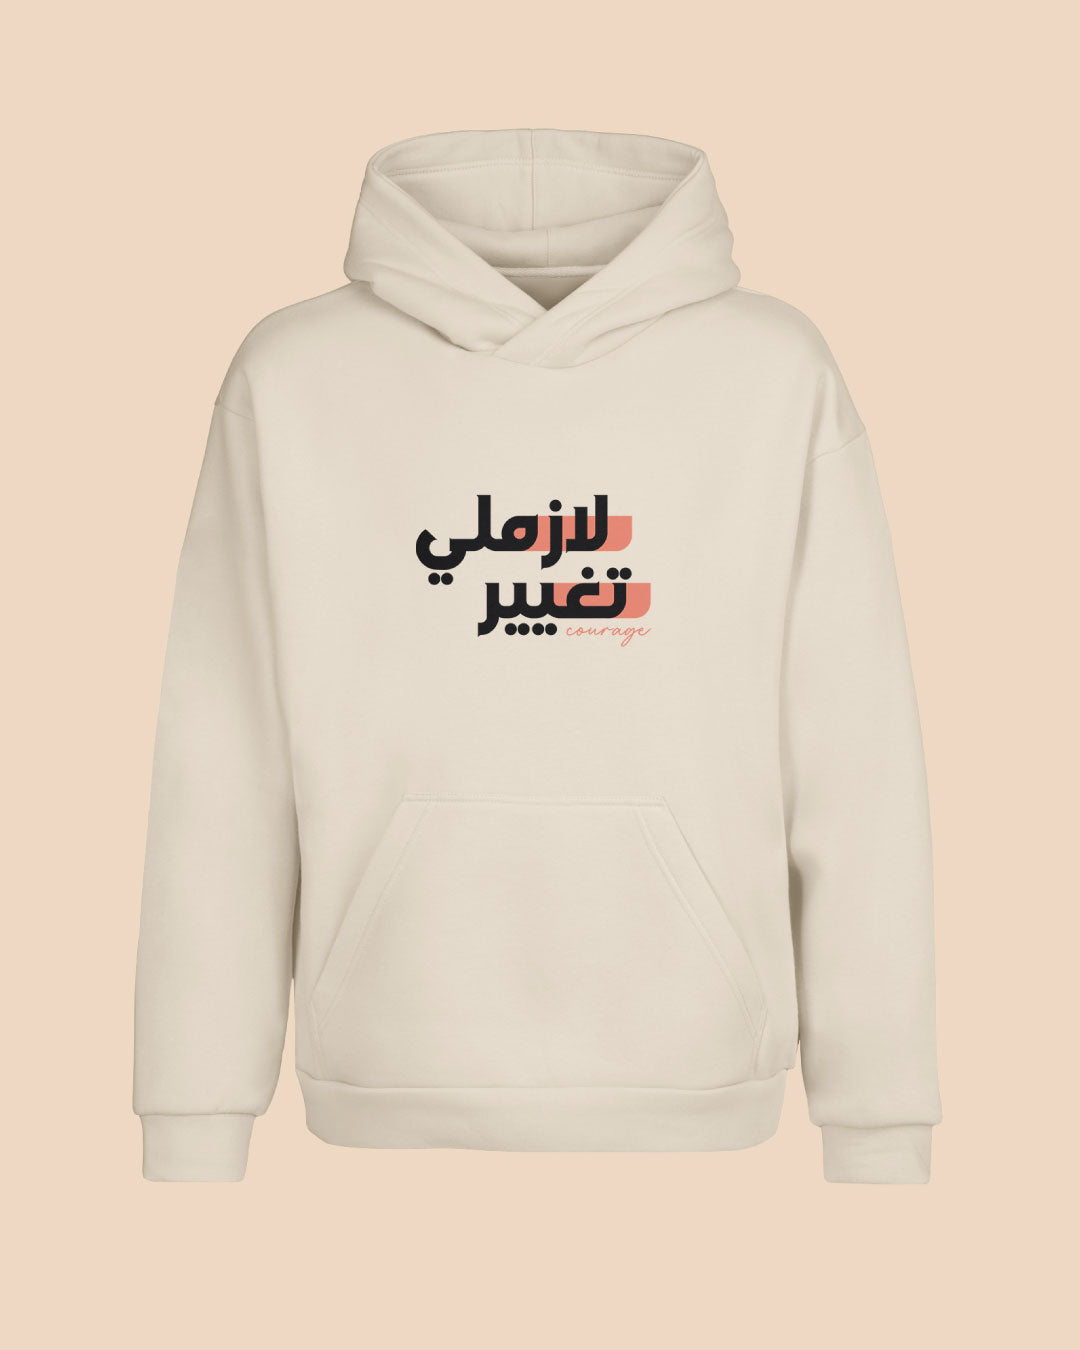 Courage Hoodie